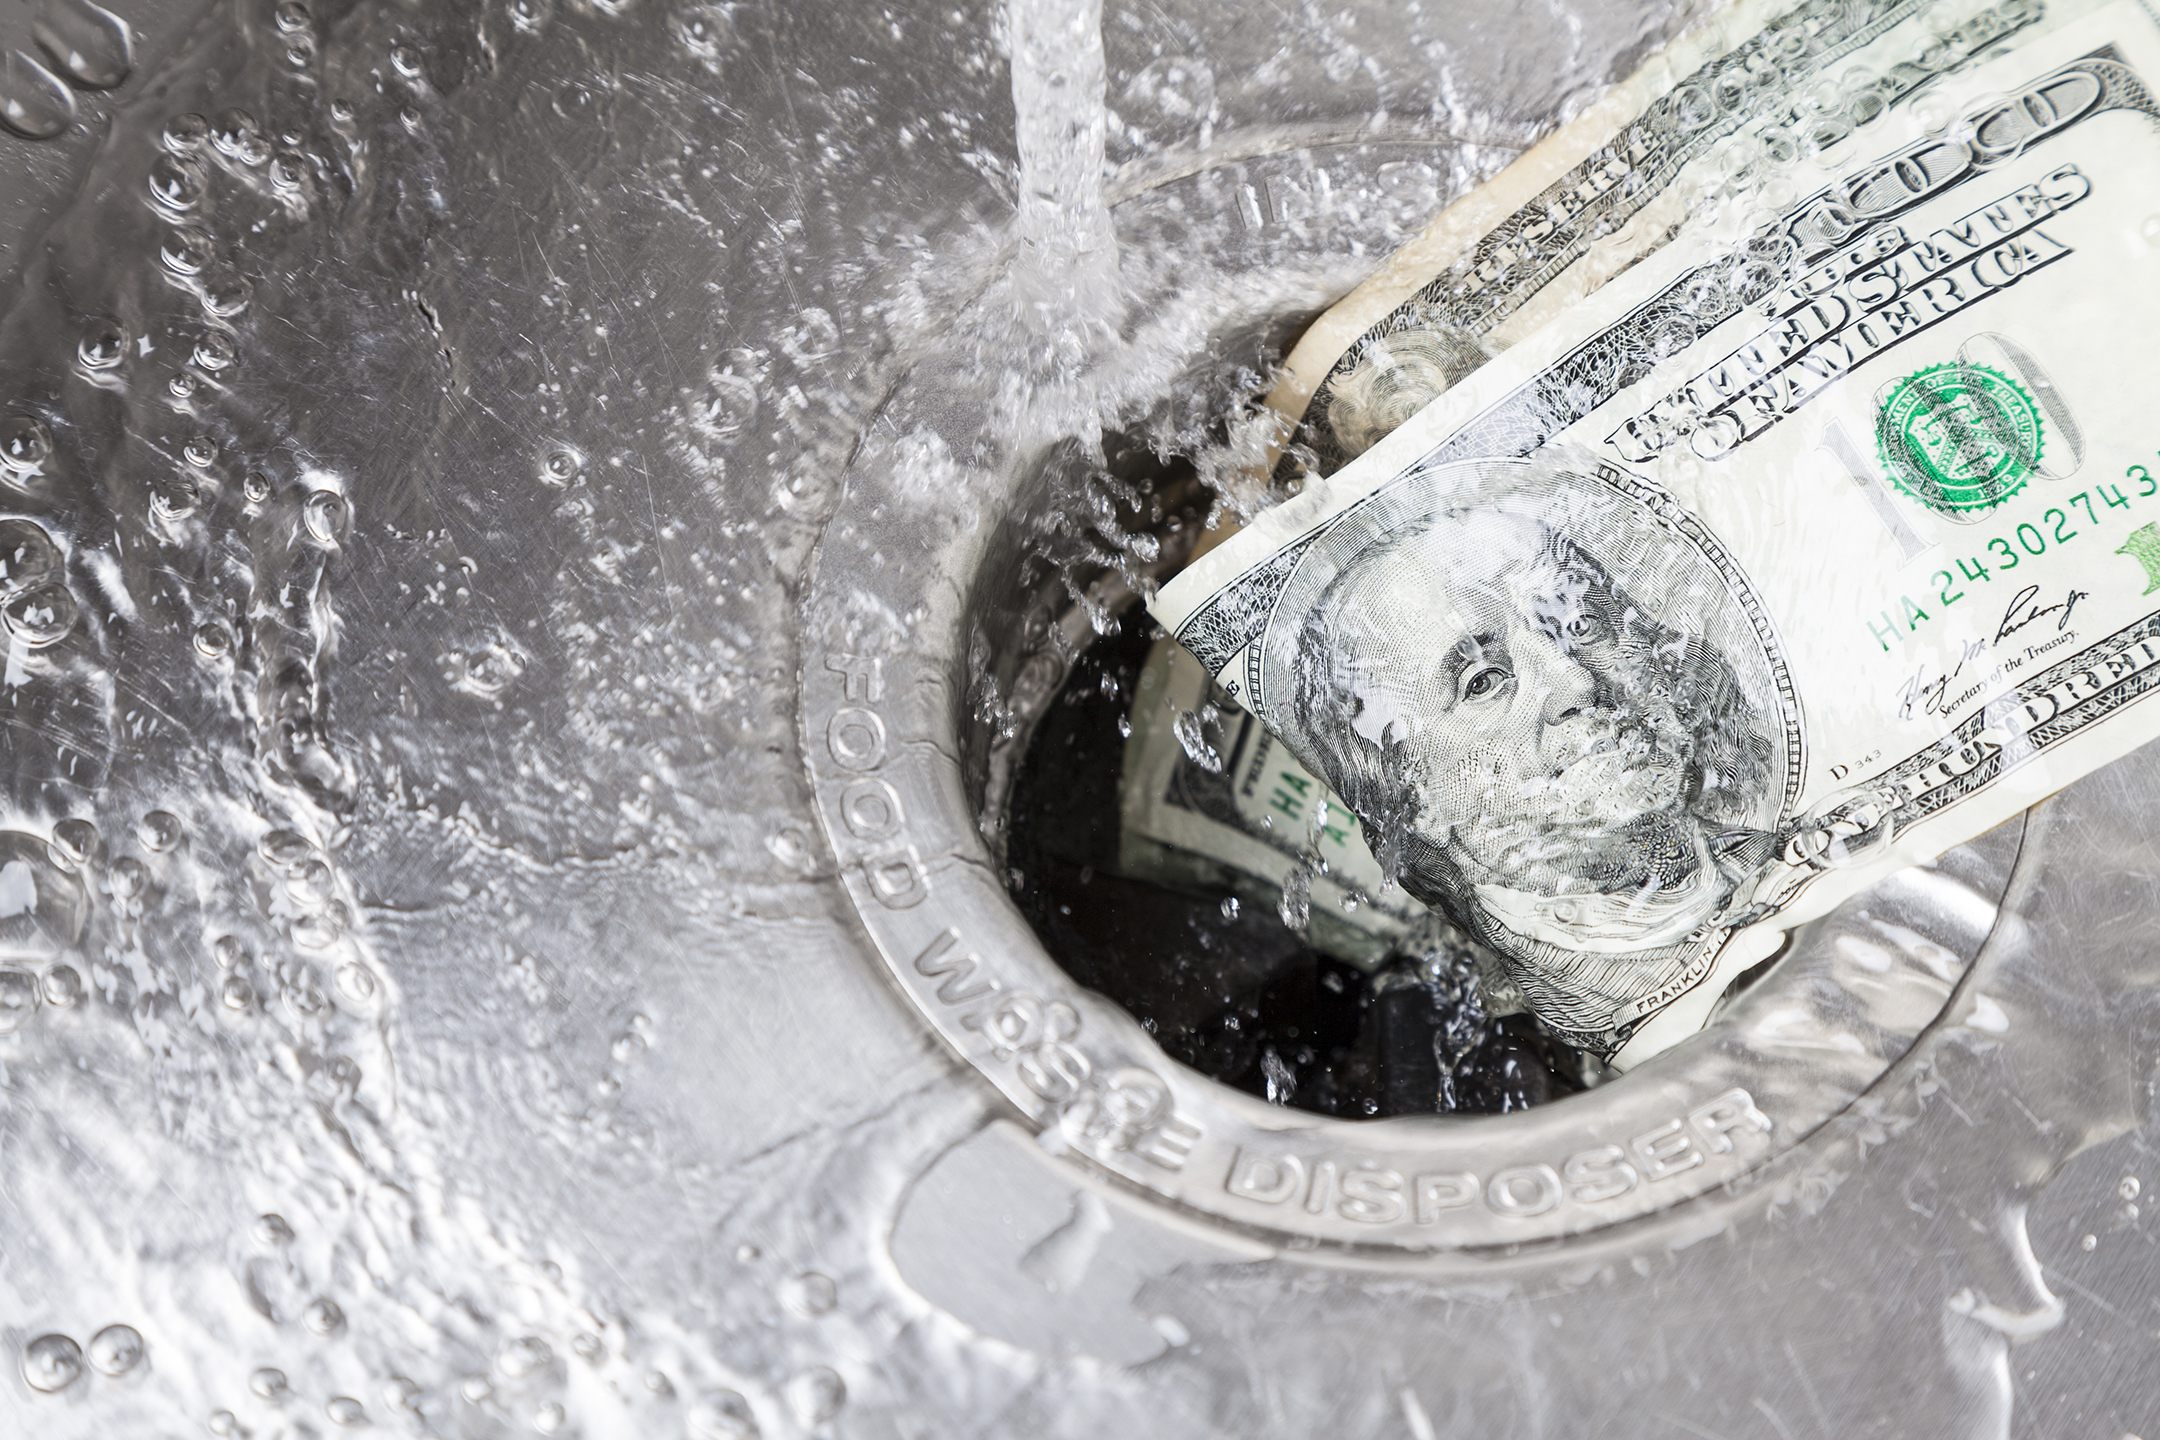 water running down a kitchen sink drain that is stuffed with hundred dollar bills